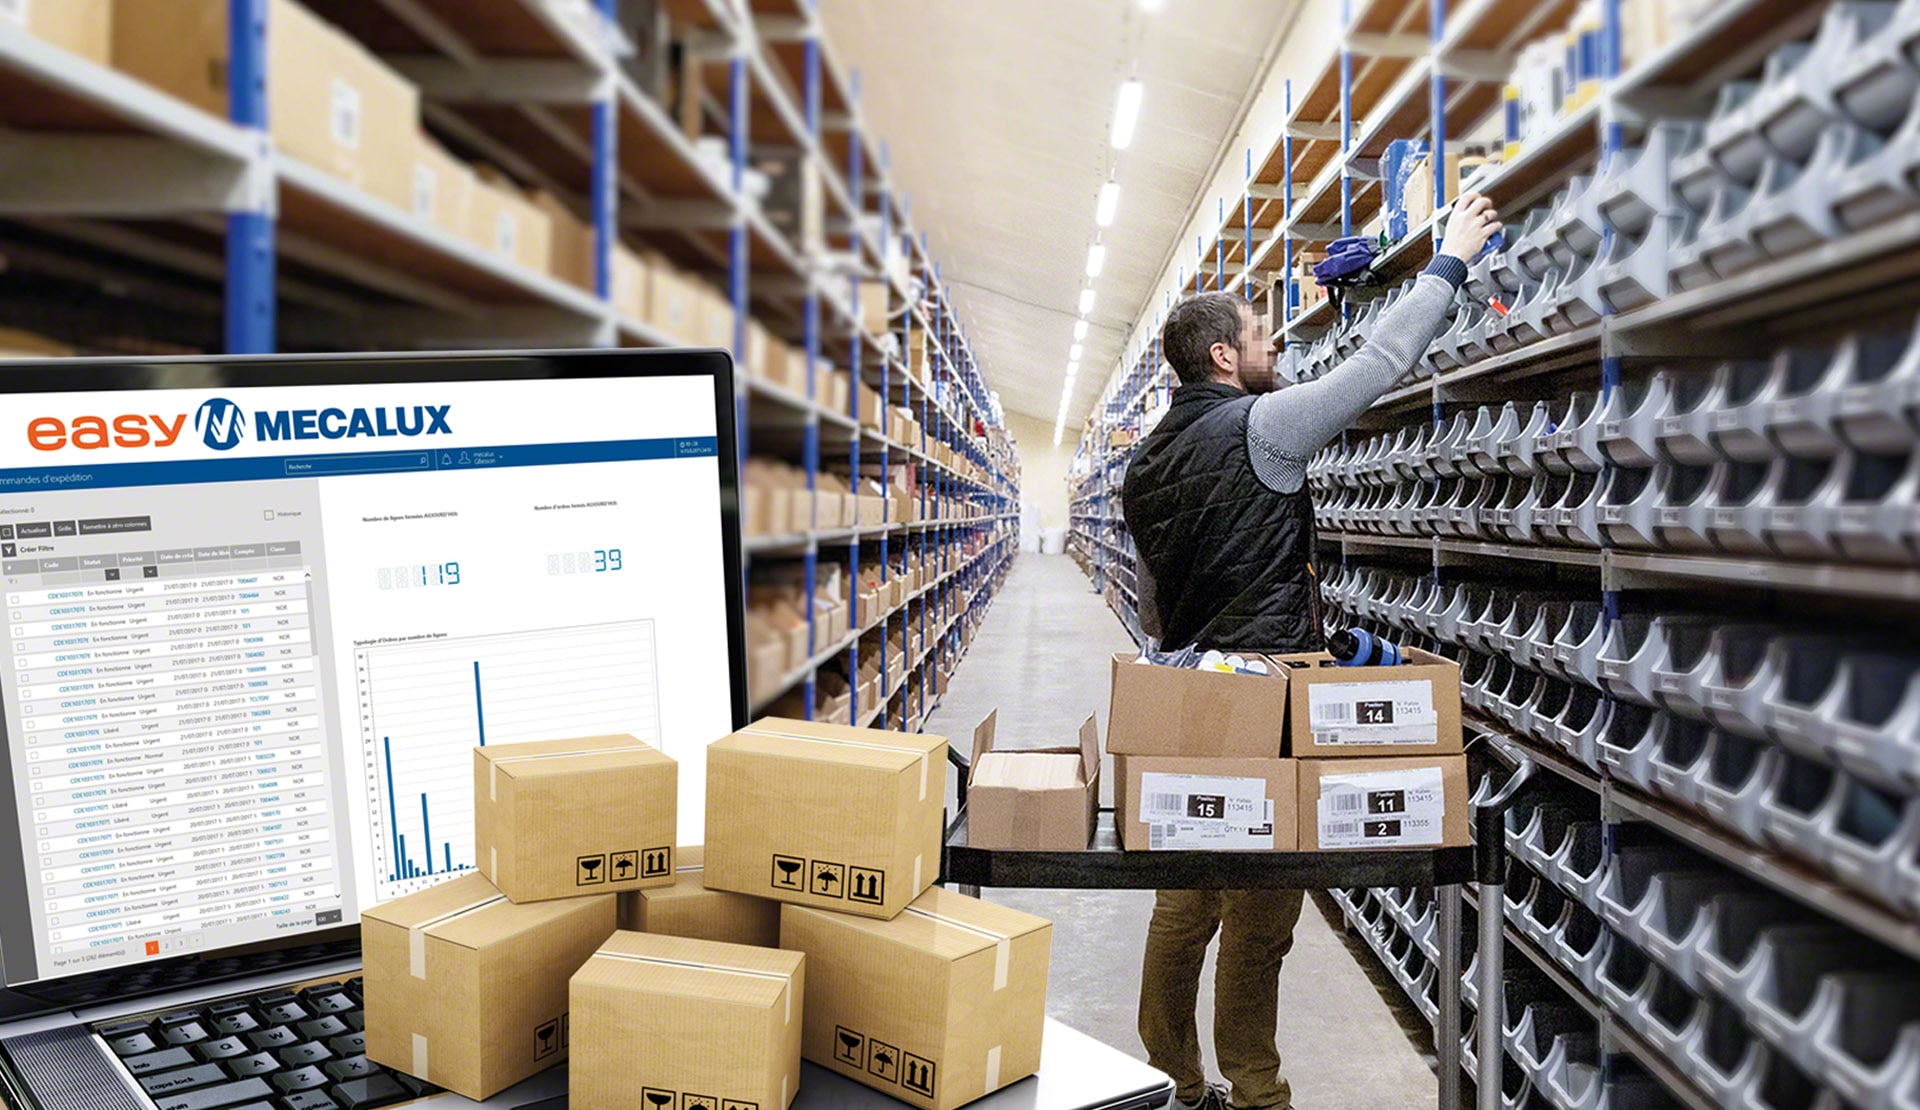 Easy WMS increases its online orders eightfold